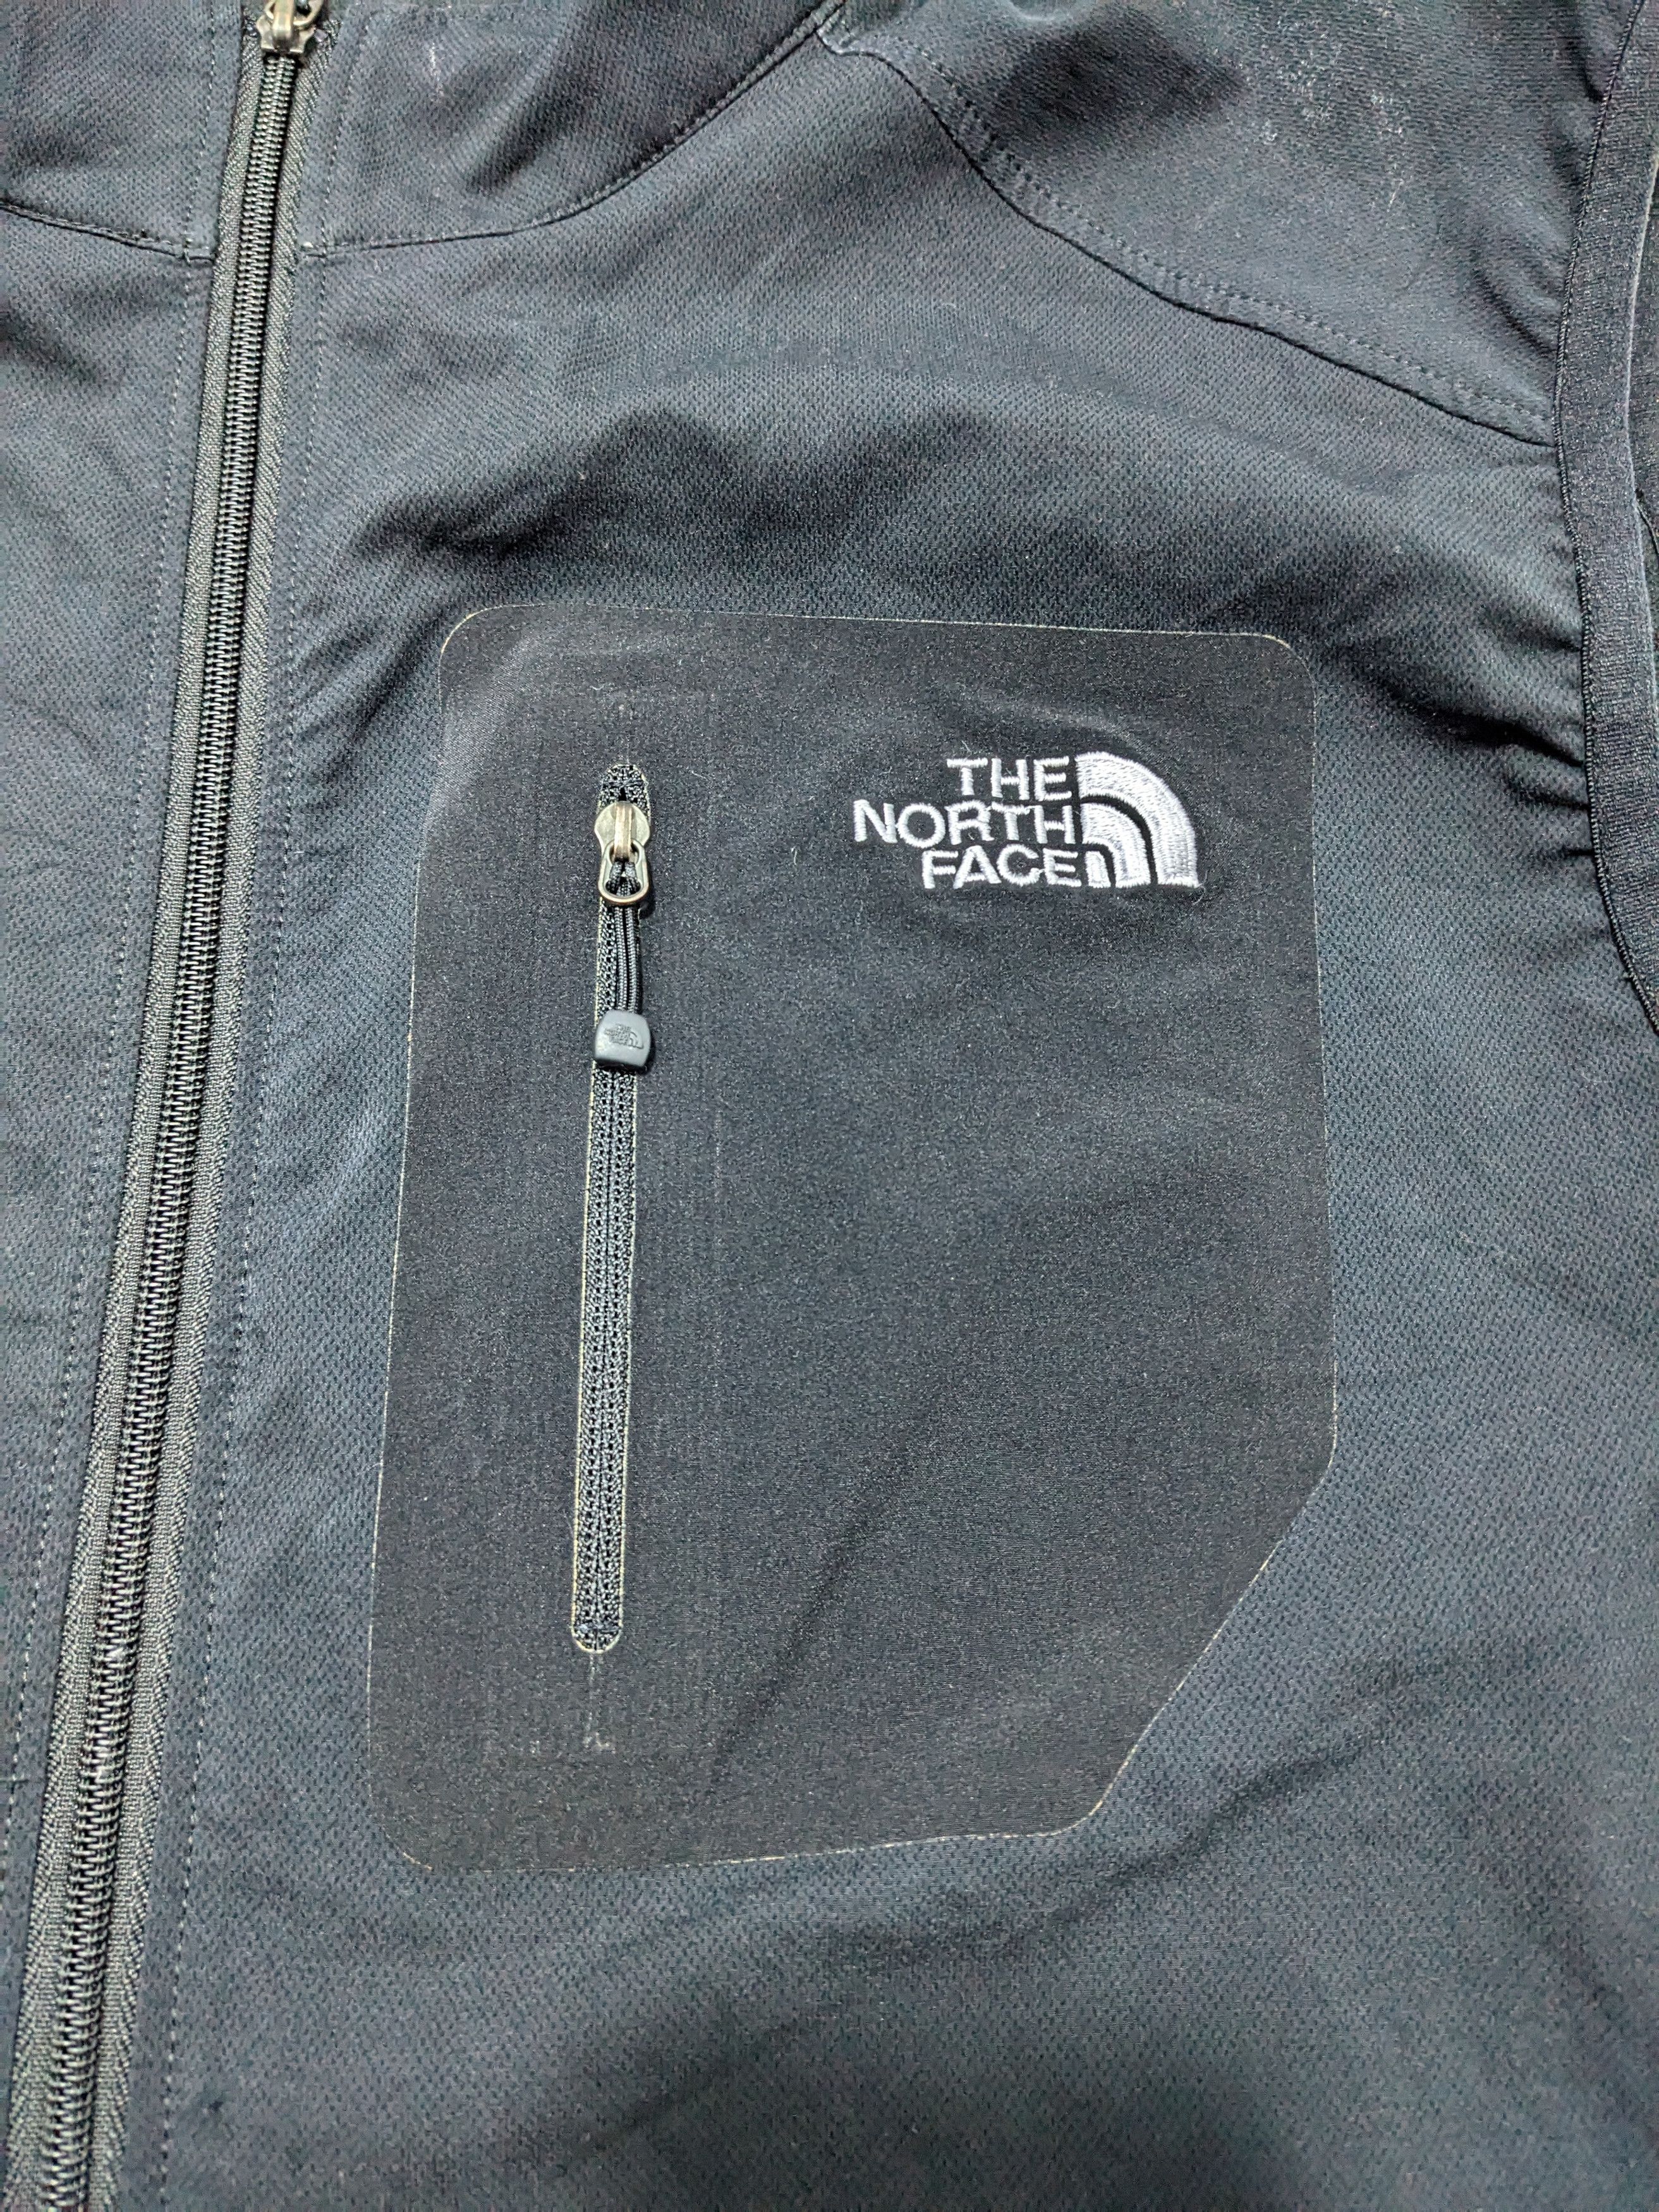 The North Face Soft Shell Black Vest - 4